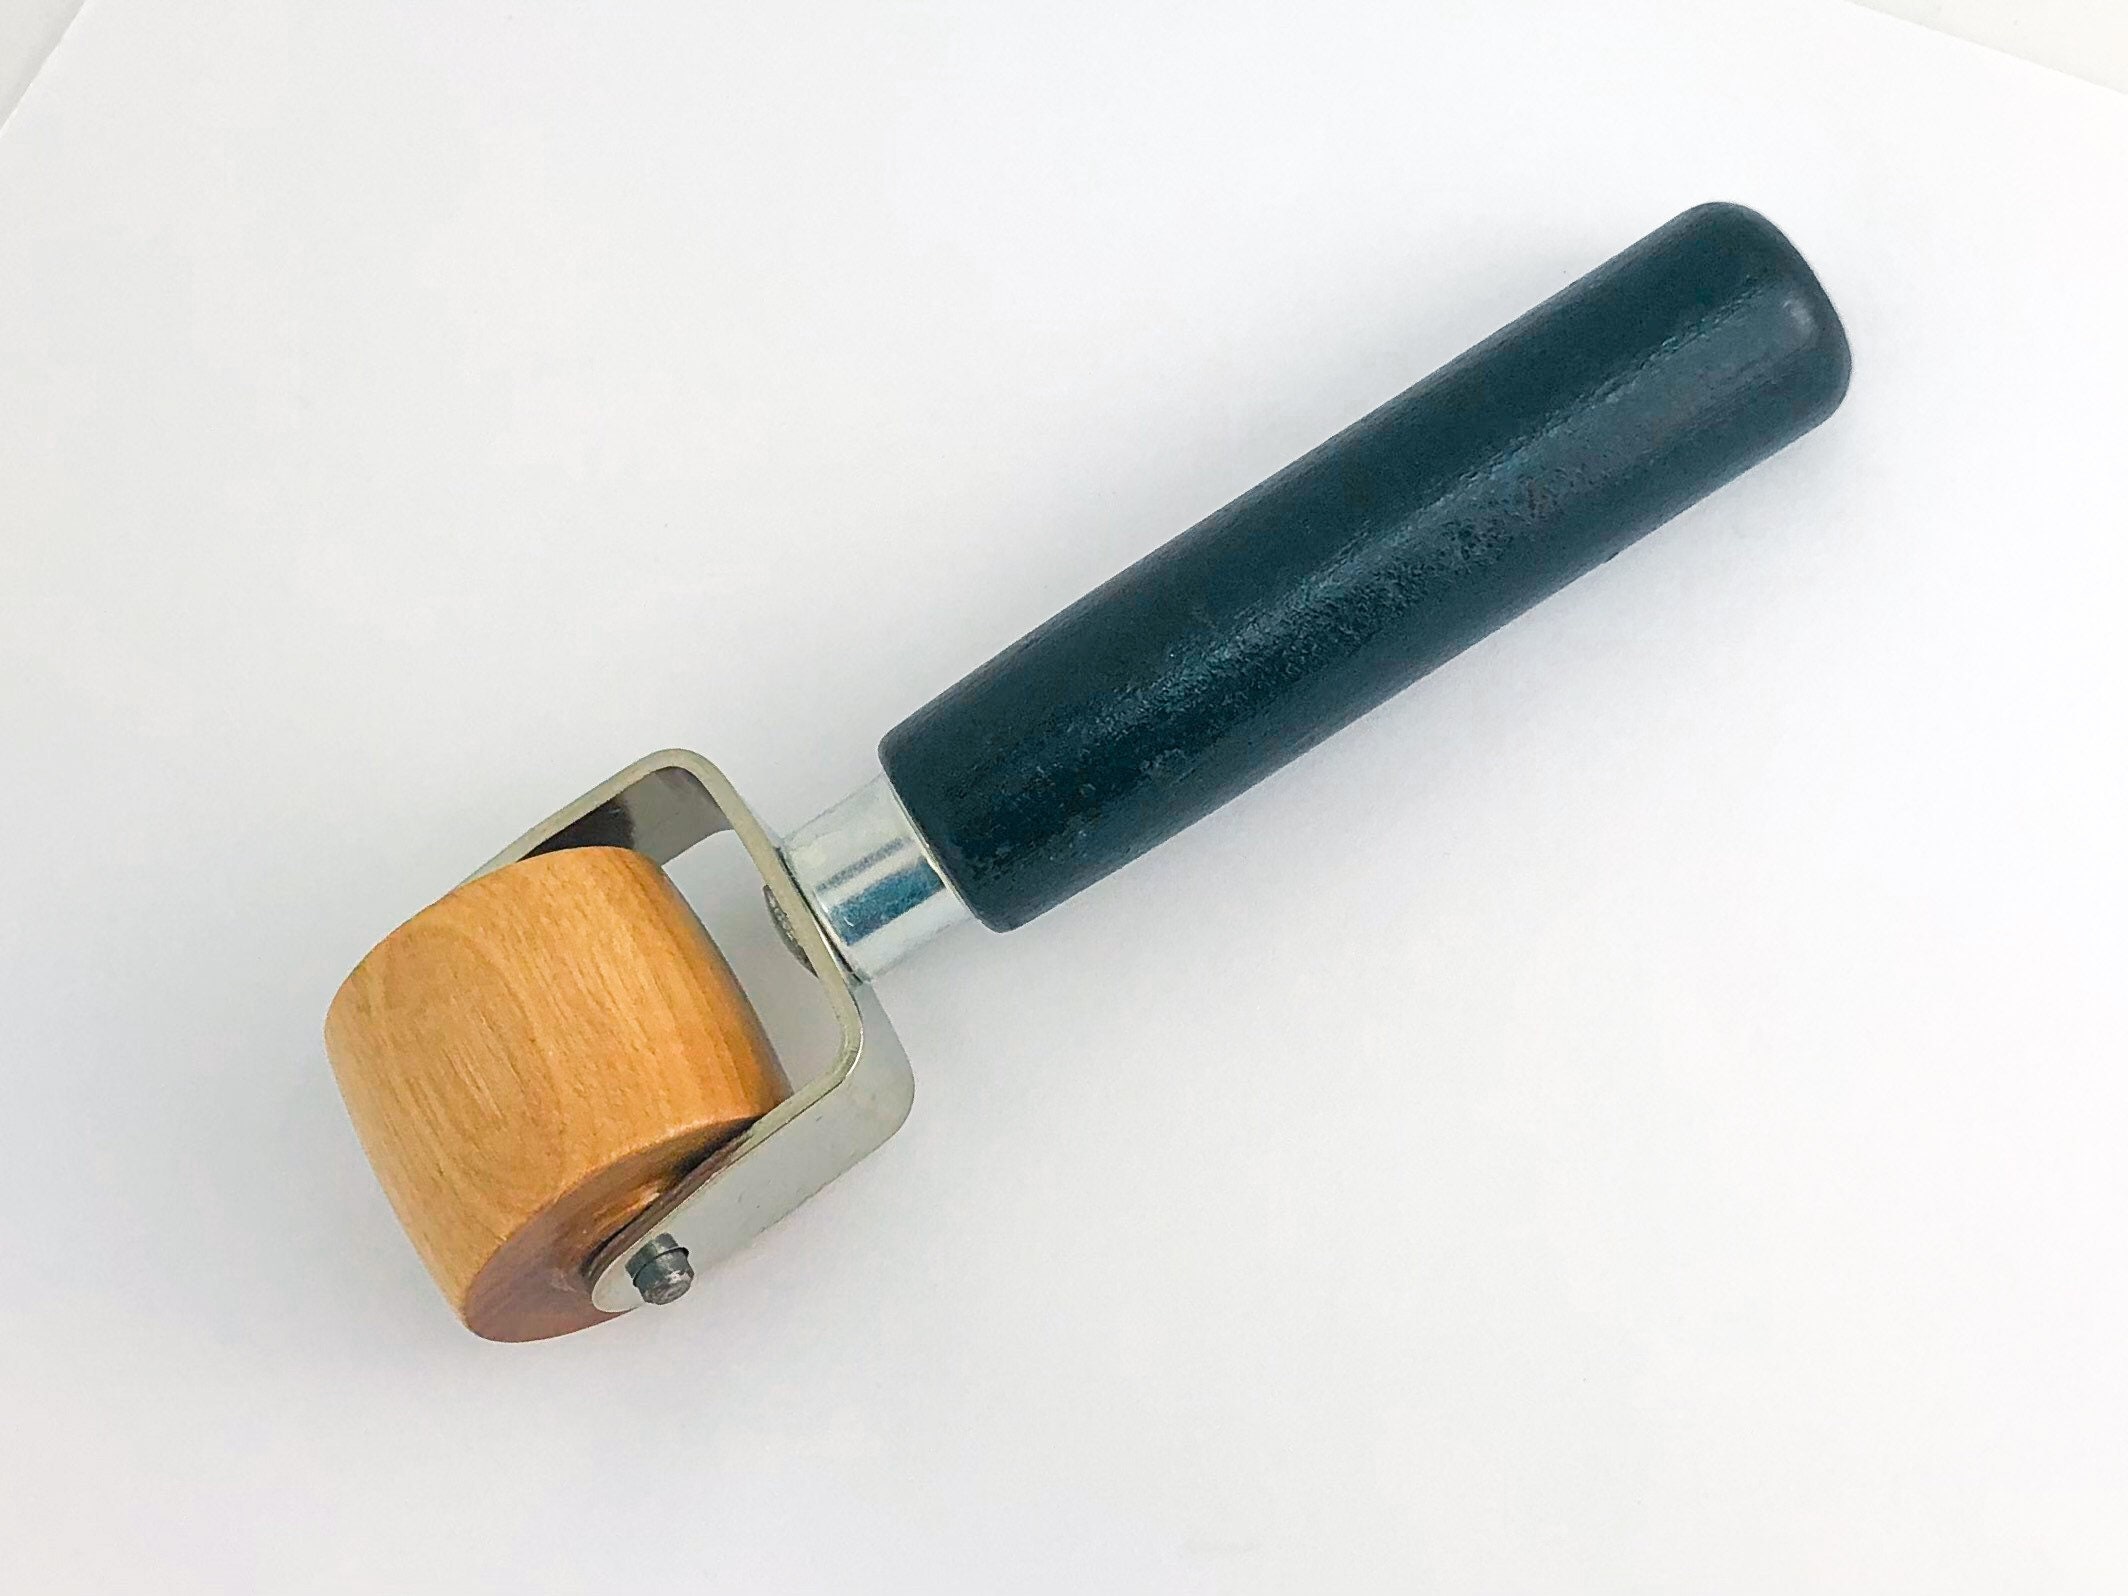 Seam Roller for Sewing, Wooden Seam Roller, Seam Pressing Tool for Sewing,  Quilting and Bag Making -  Denmark